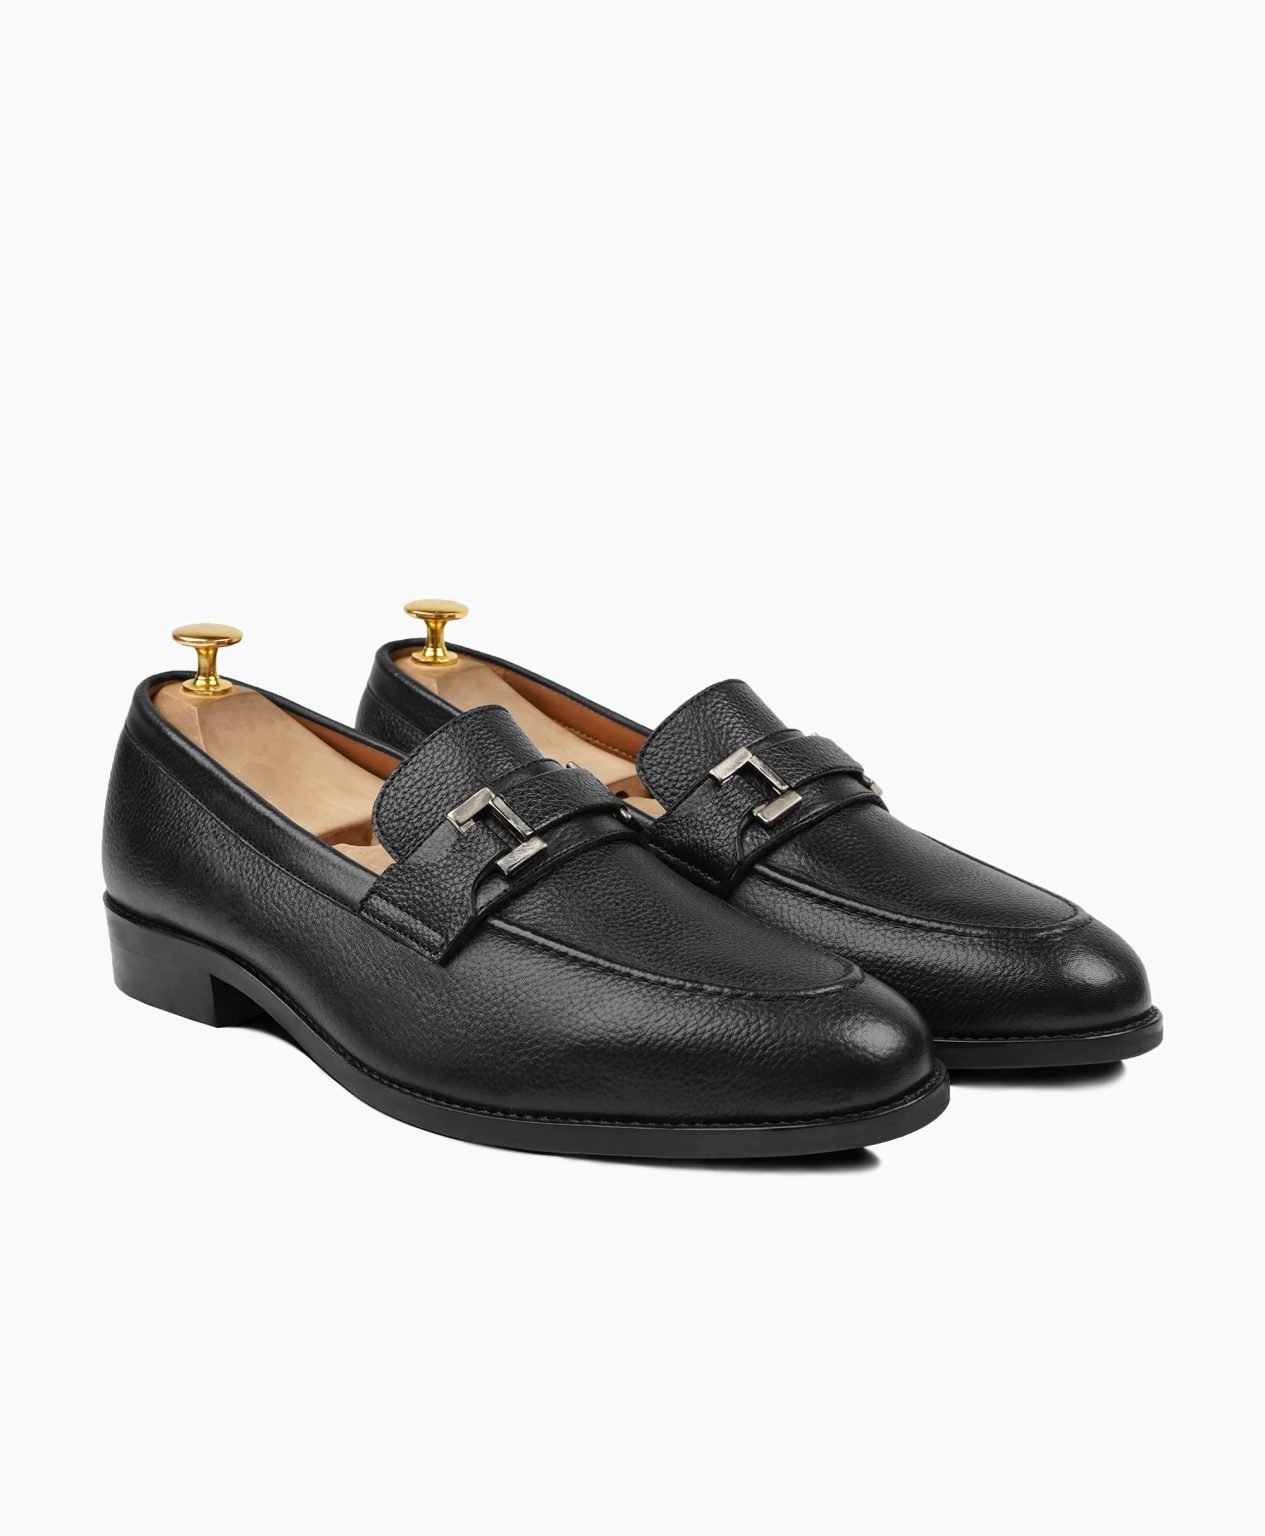 exeter-black-leather-loafers-image200